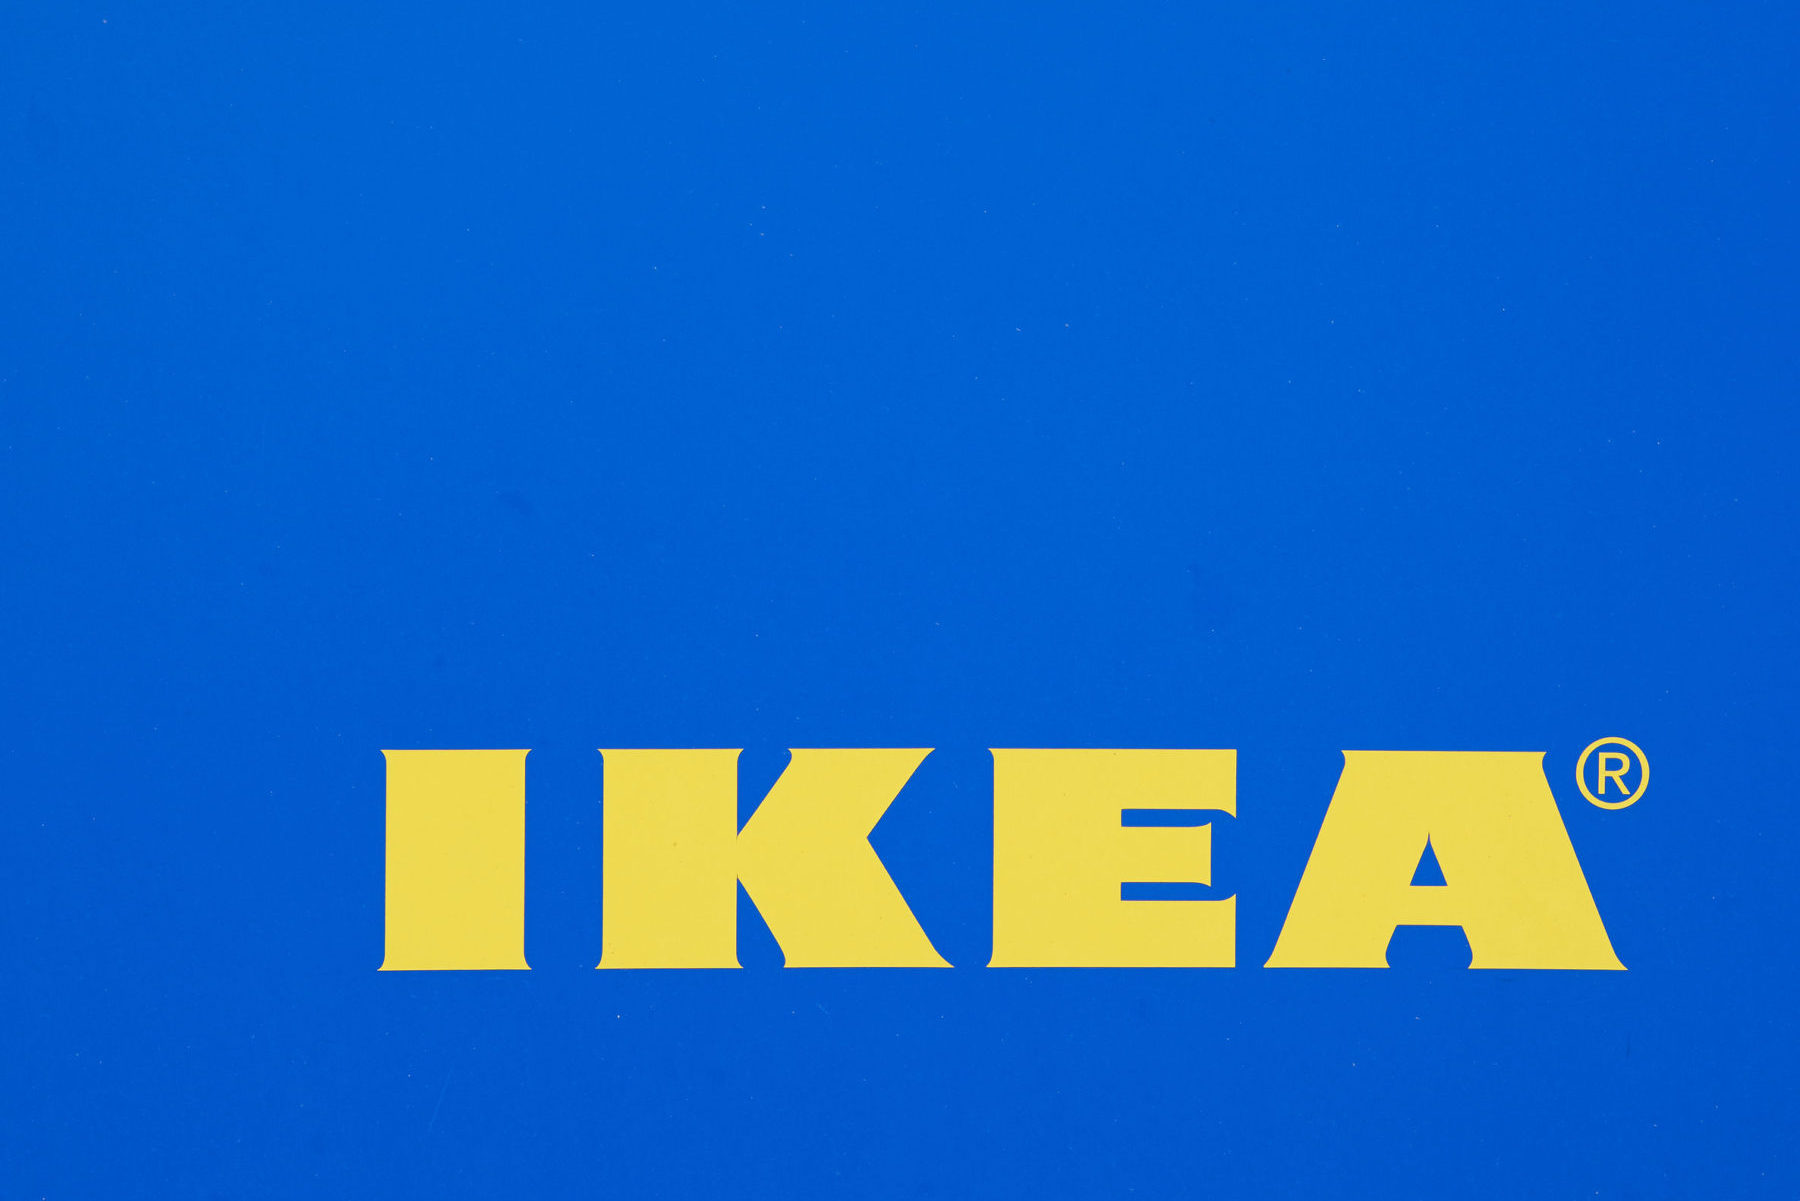 IKEA’s viral video proves print marketing is not dead and clever still works